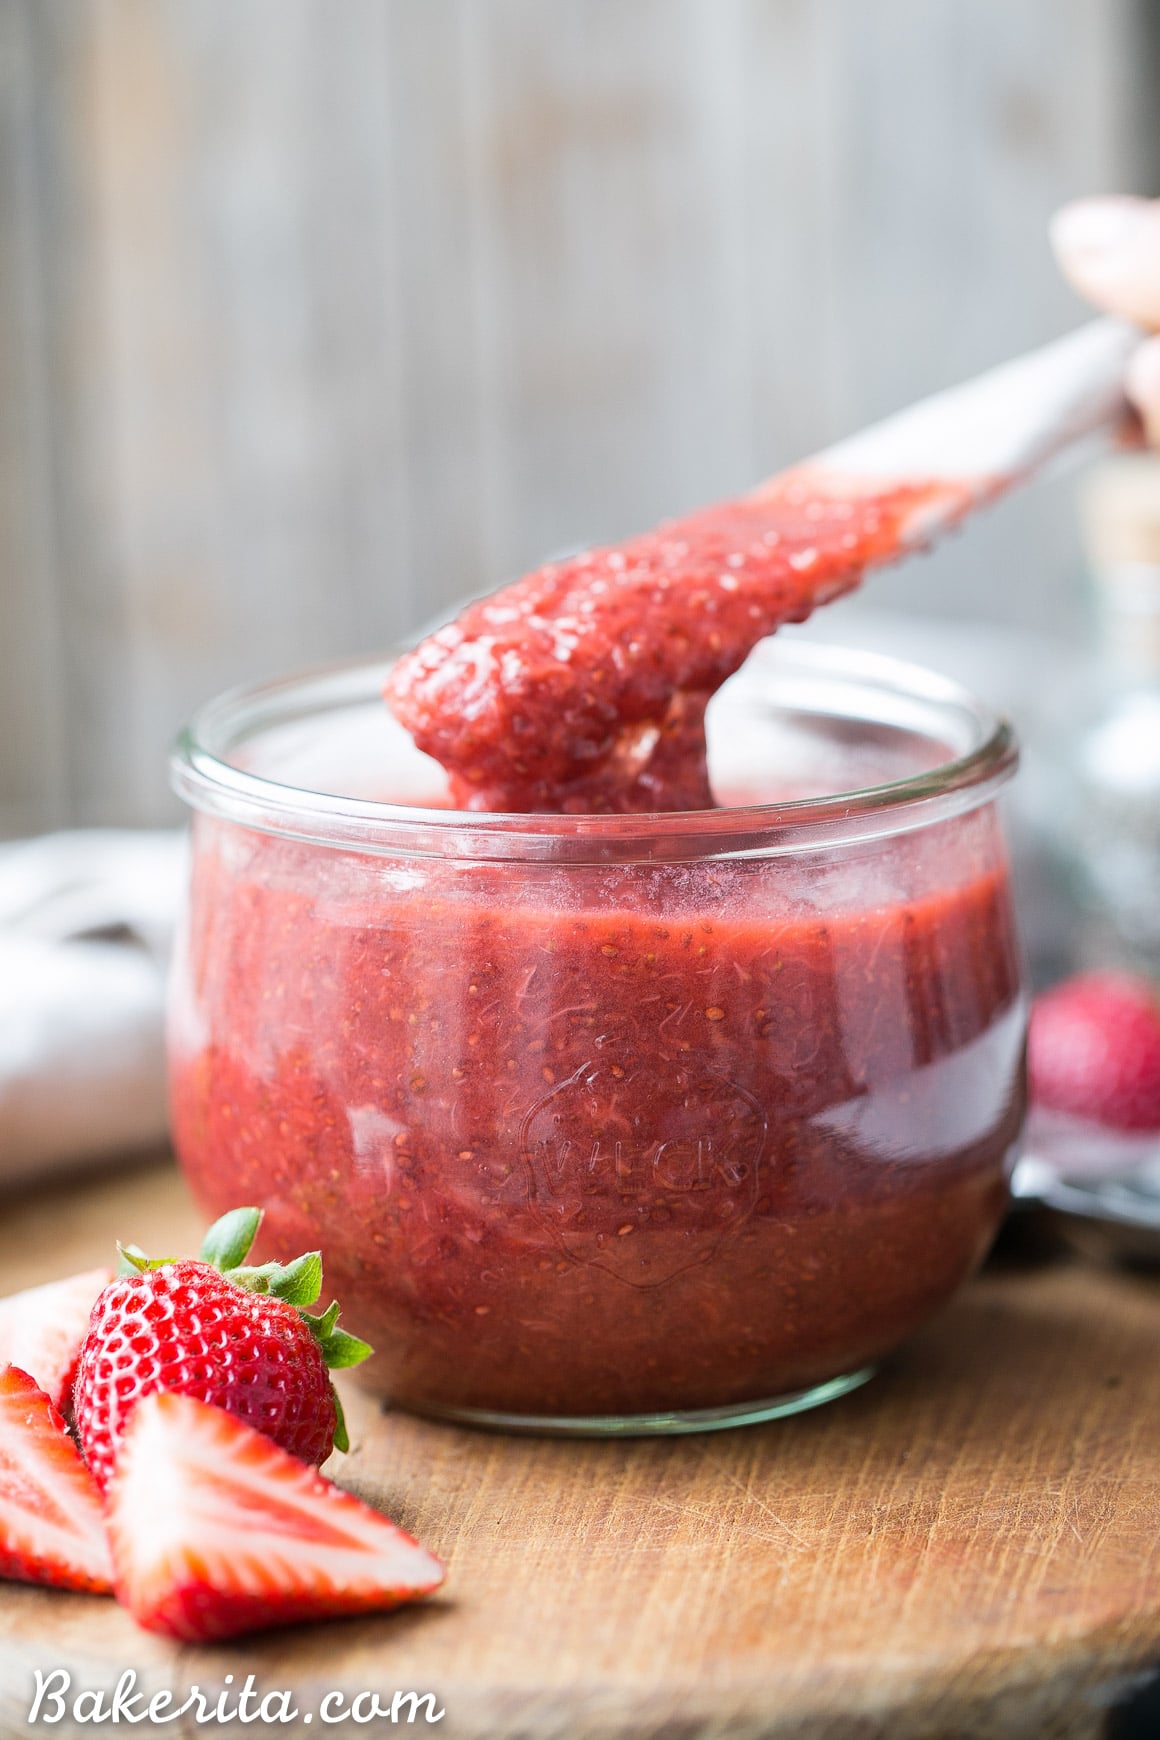 This Strawberry Chia Jam is an easy and delicious way to preserve the summer's freshest, sweetest strawberries! This four ingredient recipe is naturally thickened with chia seeds and sweetened with a touch of maple syrup. You'll love this easy paleo + vegan recipe.